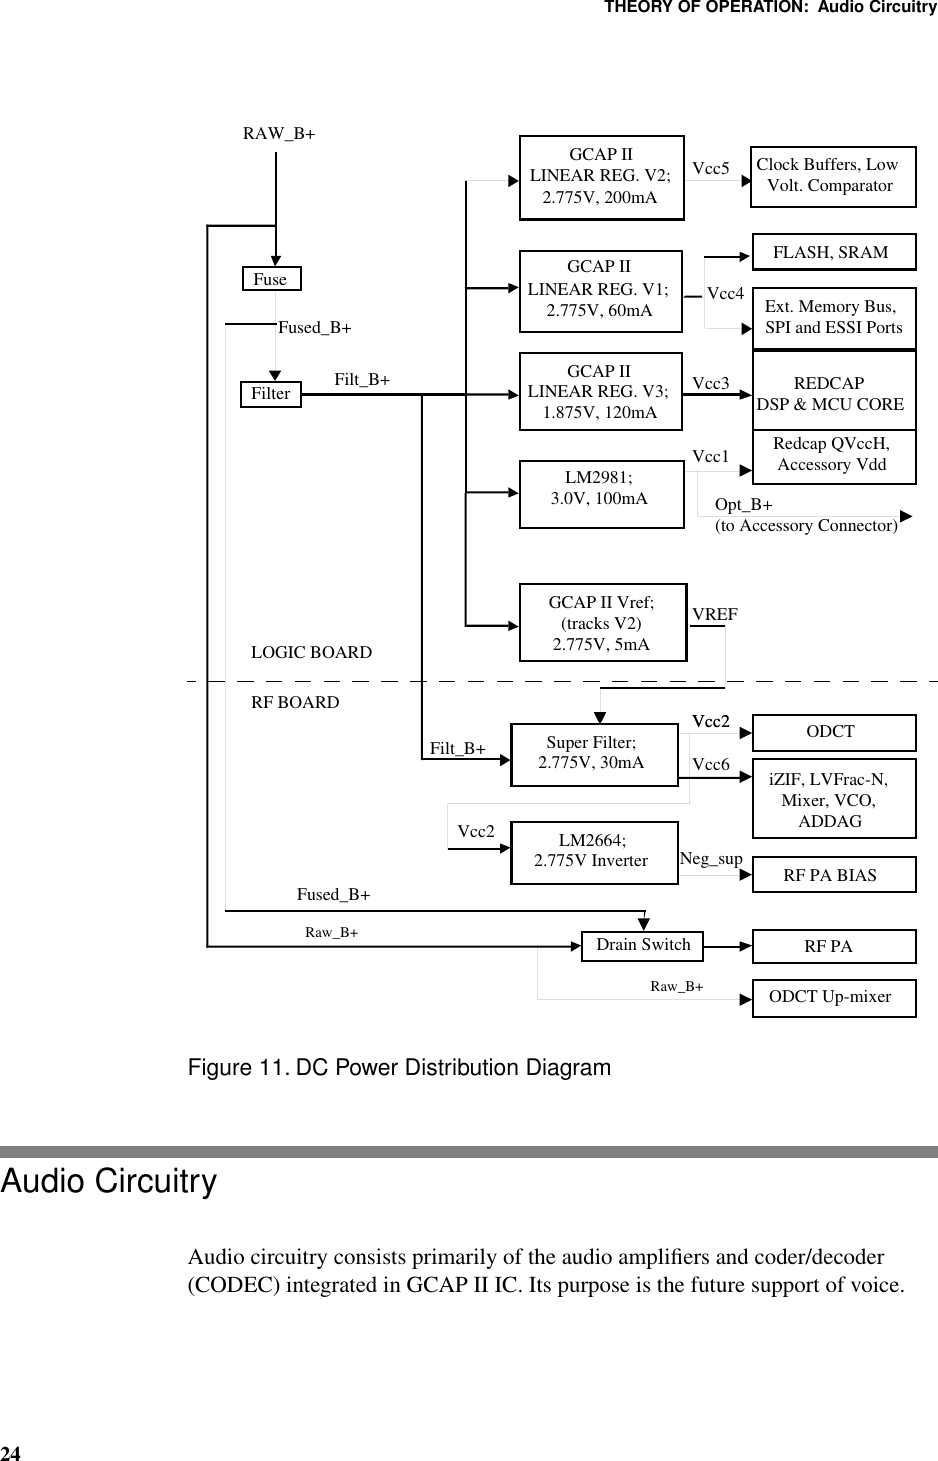 THEORY OF OPERATION:  Audio Circuitry24Figure 11. DC Power Distribution DiagramAudio CircuitryAudio circuitry consists primarily of the audio ampliﬁers and coder/decoder (CODEC) integrated in GCAP II IC. Its purpose is the future support of voice.RF PAFilterGCAP IILINEAR REG. V2;2.775V, 200mAGCAP IILINEAR REG. V1;2.775V, 60mAGCAP IILINEAR REG. V3;1.875V, 120mAGCAP II Vref;(tracks V2)2.775V, 5mAFuseLM2981;3.0V, 100mARAW_B+Raw_B+LM2664;2.775V InverterODCTSuper Filter;2.775V, 30mADrain SwitchODCT Up-mixeriZIF, LVFrac-N, Mixer, VCO, ADDAGFLASH, SRAMRedcap QVccH,Accessory VddExt. Memory Bus, SPI and ESSI PortsREDCAP DSP &amp; MCU COREFilt_B+Fused_B+Filt_B+Fused_B+Vcc2Vcc2Vcc6Vcc2Vcc4Vcc3Clock Buffers, Low Volt. ComparatorVcc5Vcc1Opt_B+ (to Accessory Connector)VREFRF PA BIASNeg_supLOGIC BOARDRF BOARDRaw_B+